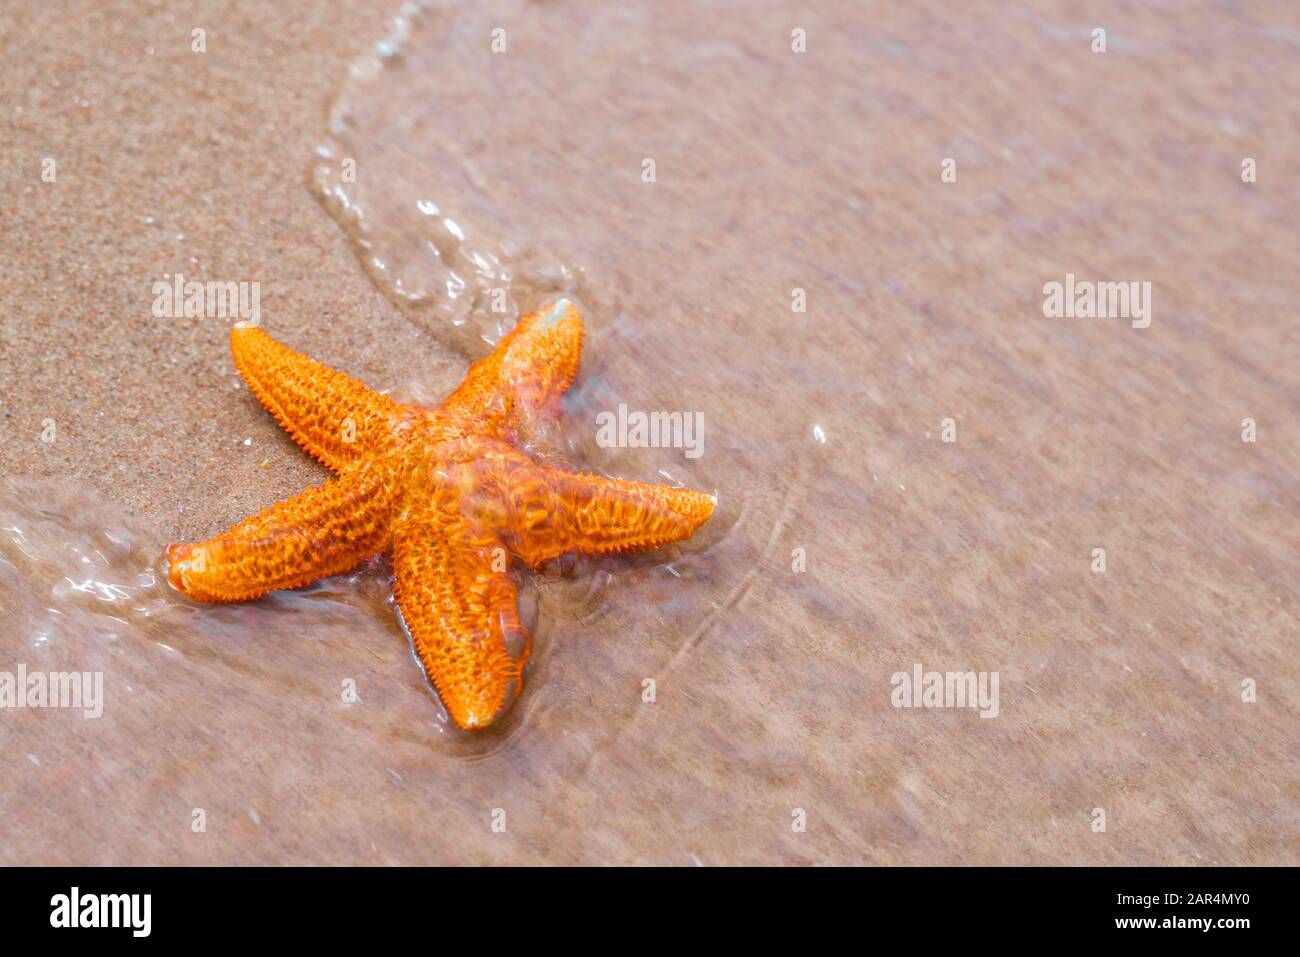 Orange starfish has been washed ashore on beach sand at sunset. Tourism promotion concept Stock Photo